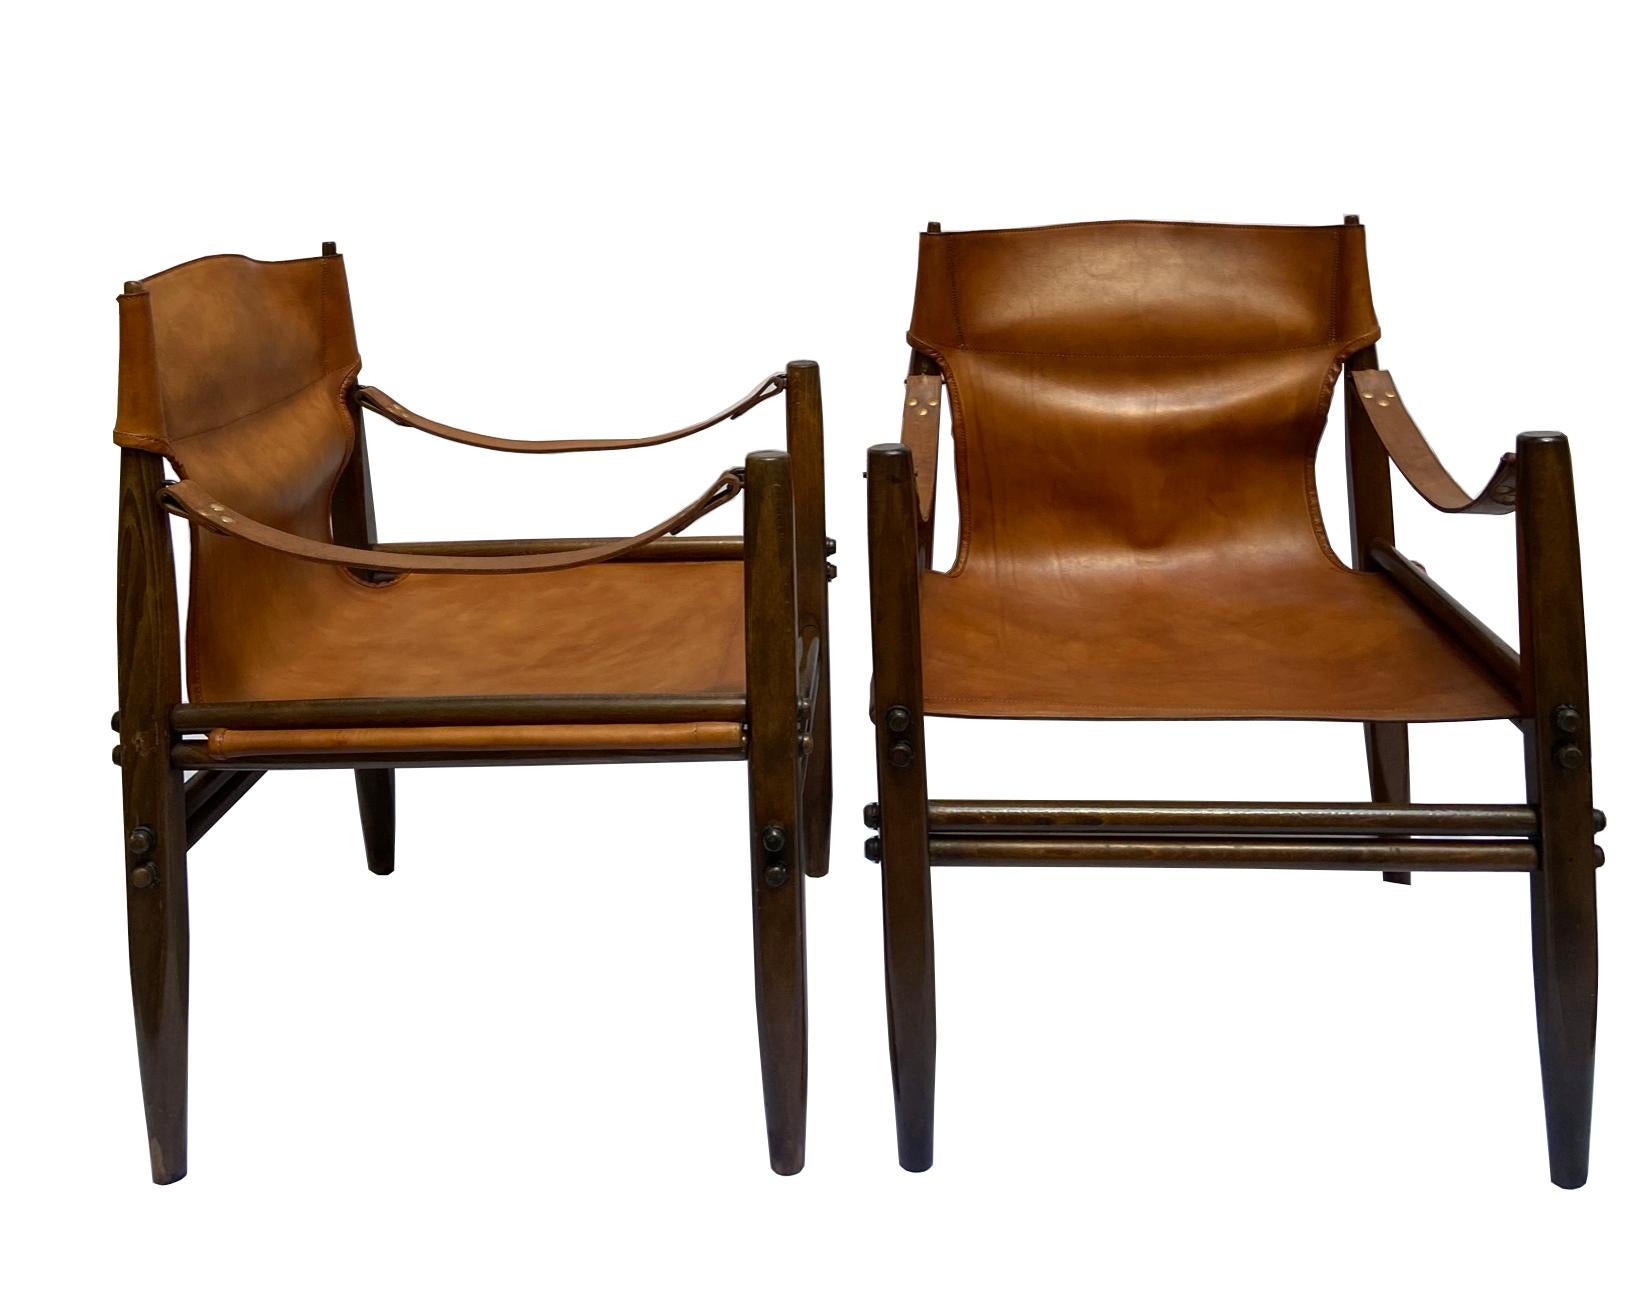 Pair of Oasi 85 model armchairs designed by Franco Legler, produced by Zanotta, 1960. The armchairs have a beech wood frame and leather upholstery. The particularity of the seat, in addition to the perfect wooden joints, is its removable structure.